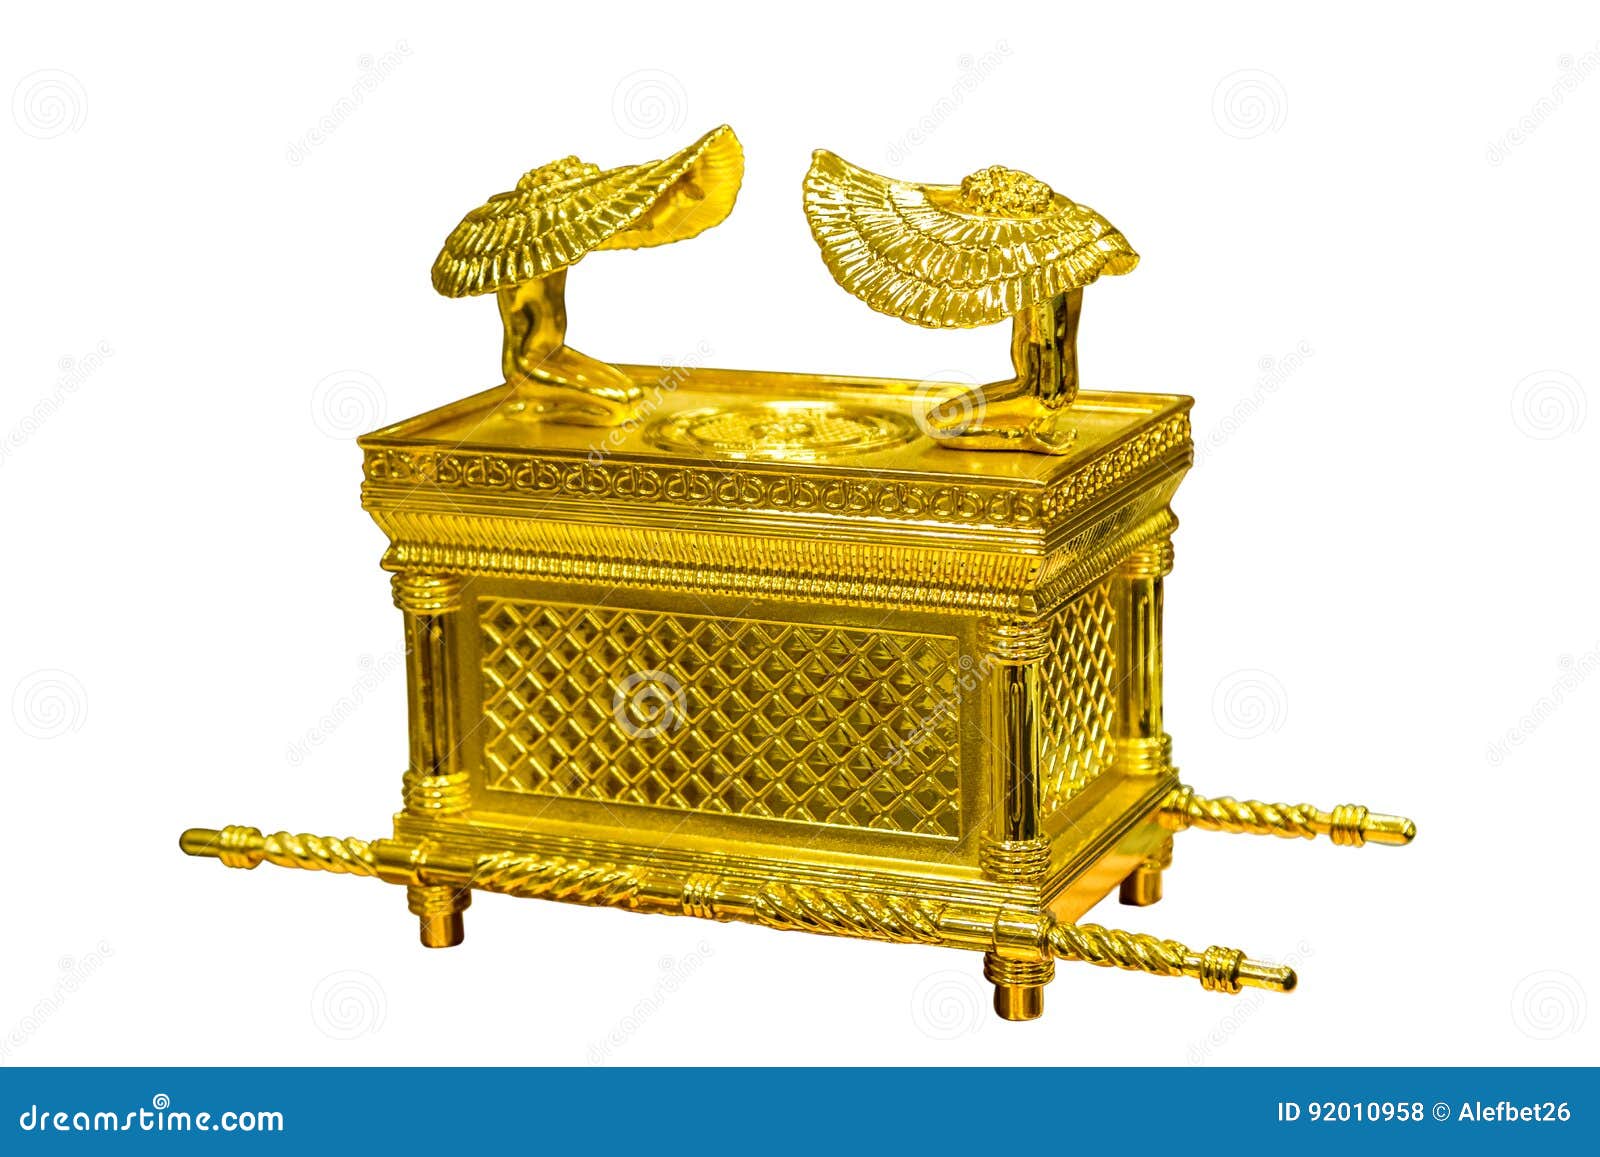 the ark of the covenant, jewish religious 